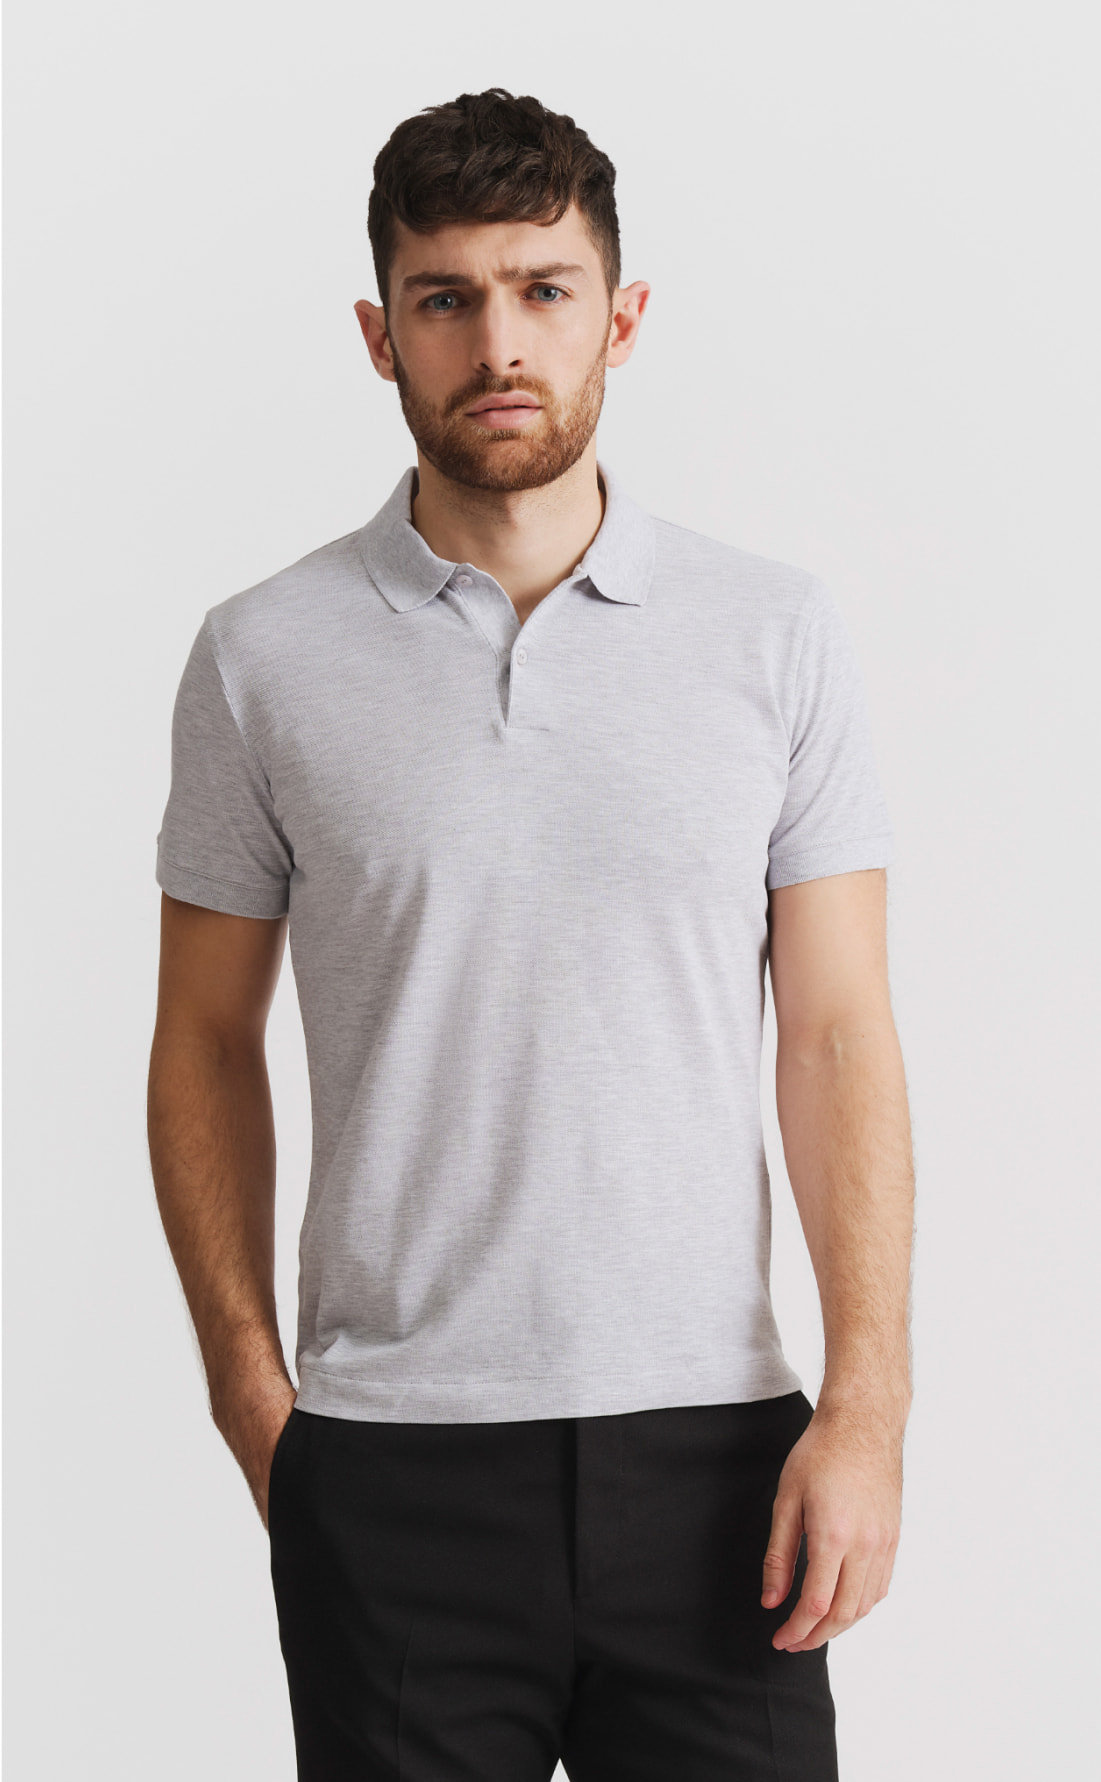 droom dennenboom dwaas Polos/Henleys | Son of a Tailor - Made to order. Zero Inventory Waste.